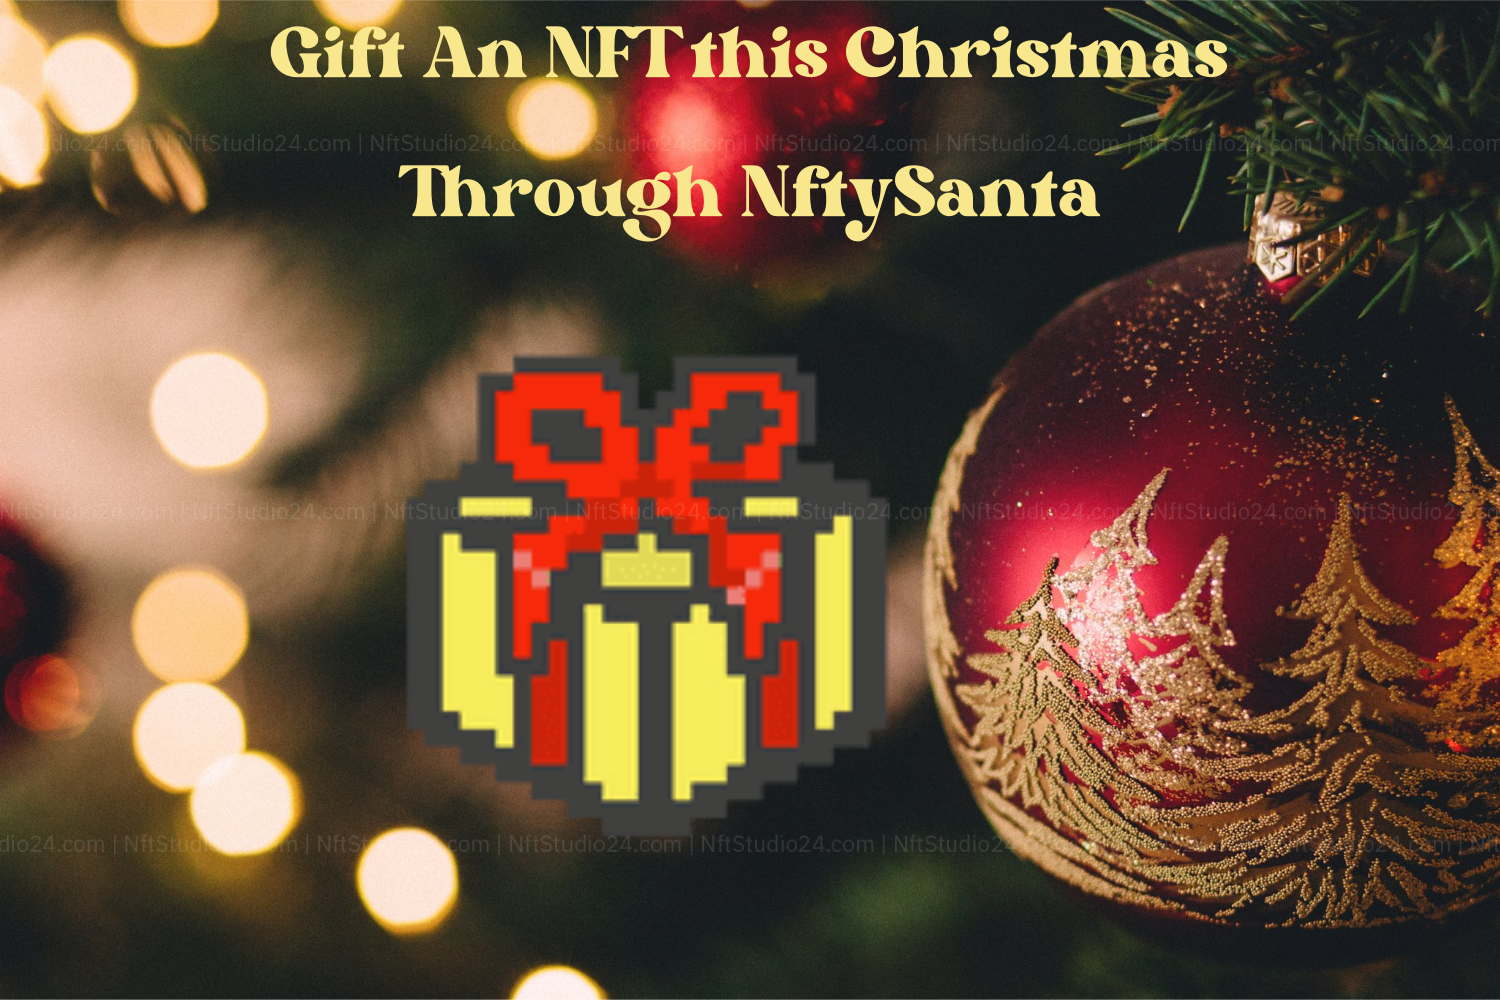 NftySanta Gift Wraps NFTs For Sending Them As A Christmas Gift.